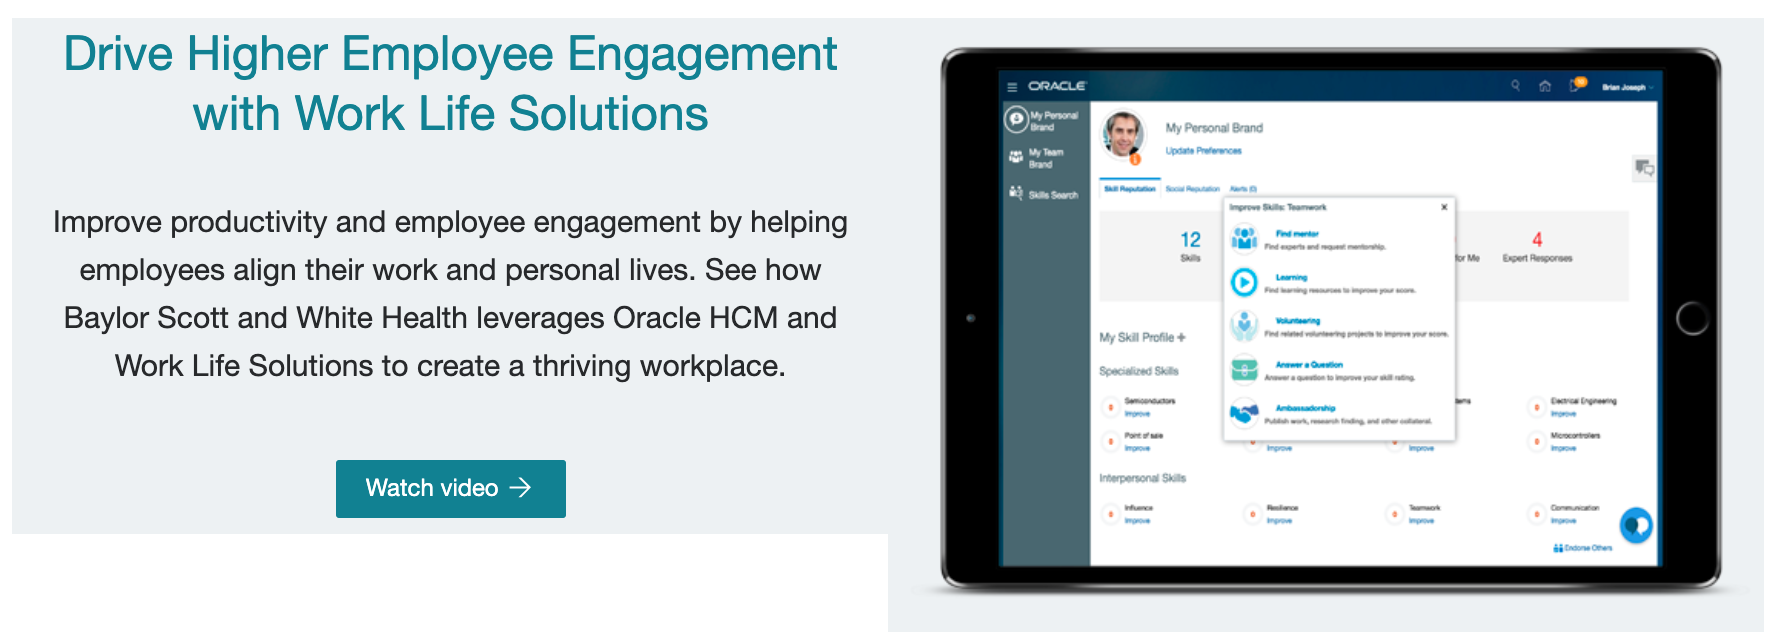 With Oracle Work Life Solutions Connection, managers can see the information and see how to coach their staff.